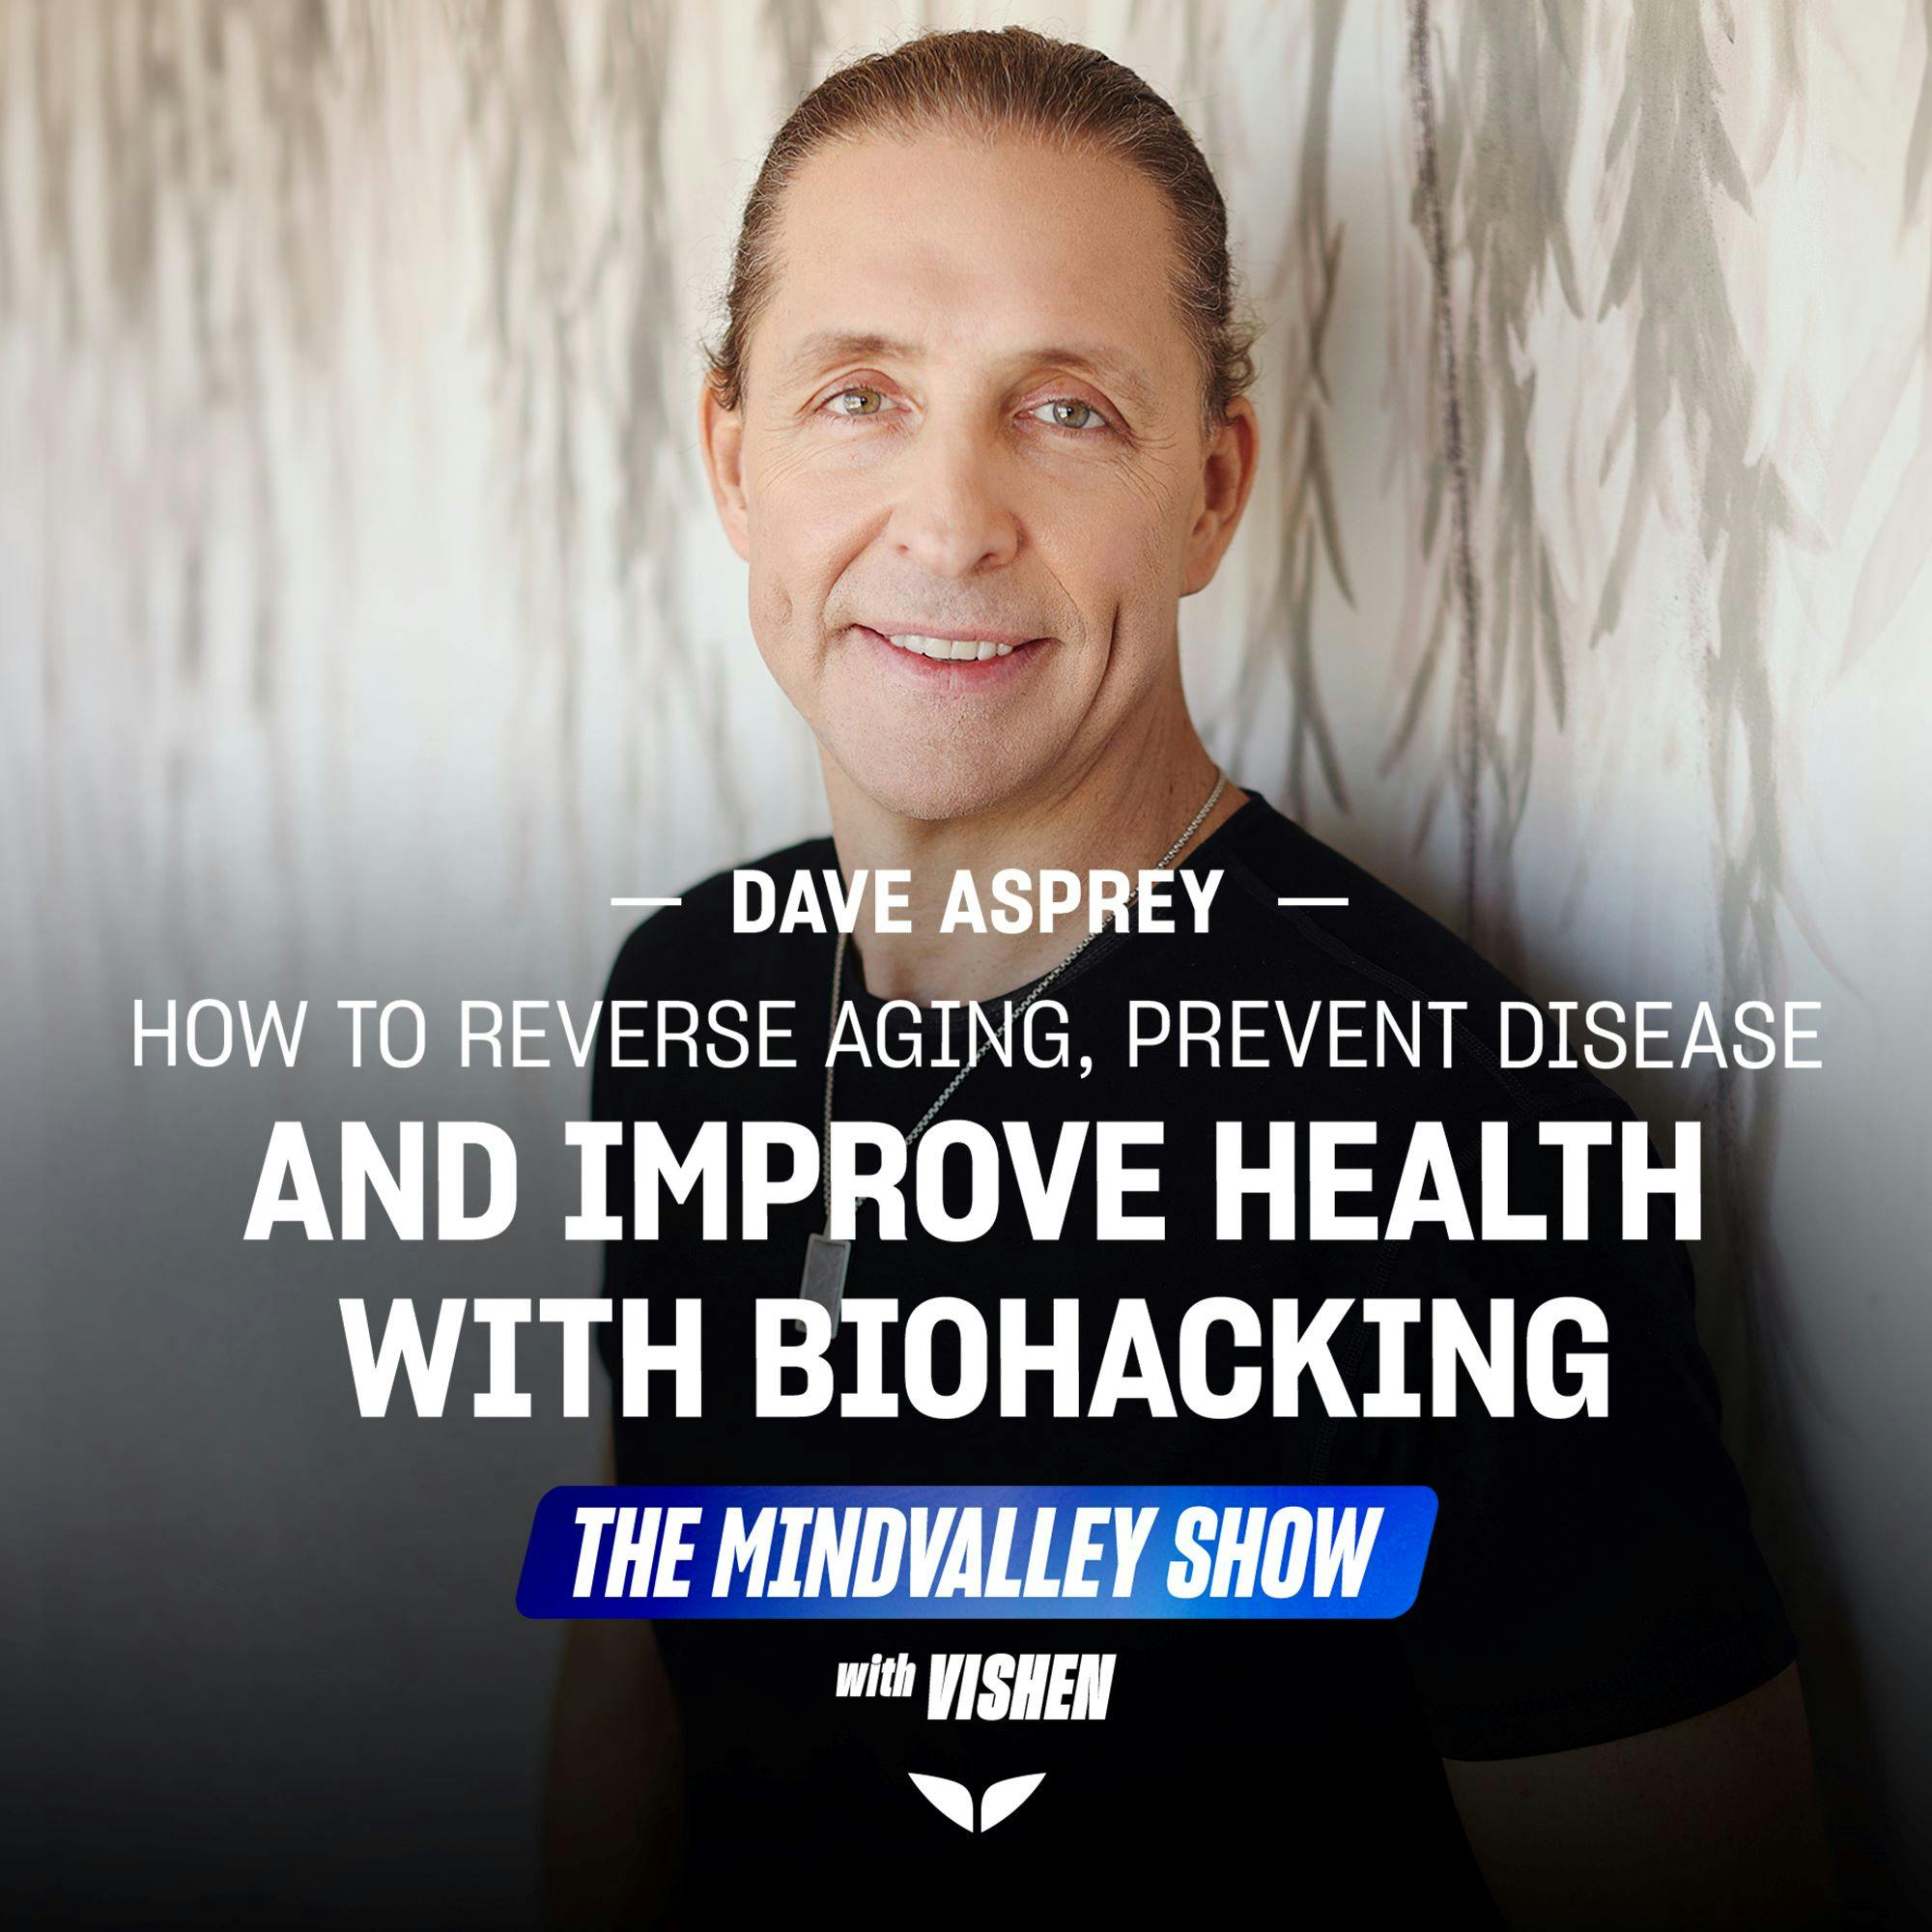 How to Reverse Aging, Prevent Disease and Improve Health with Biohacking